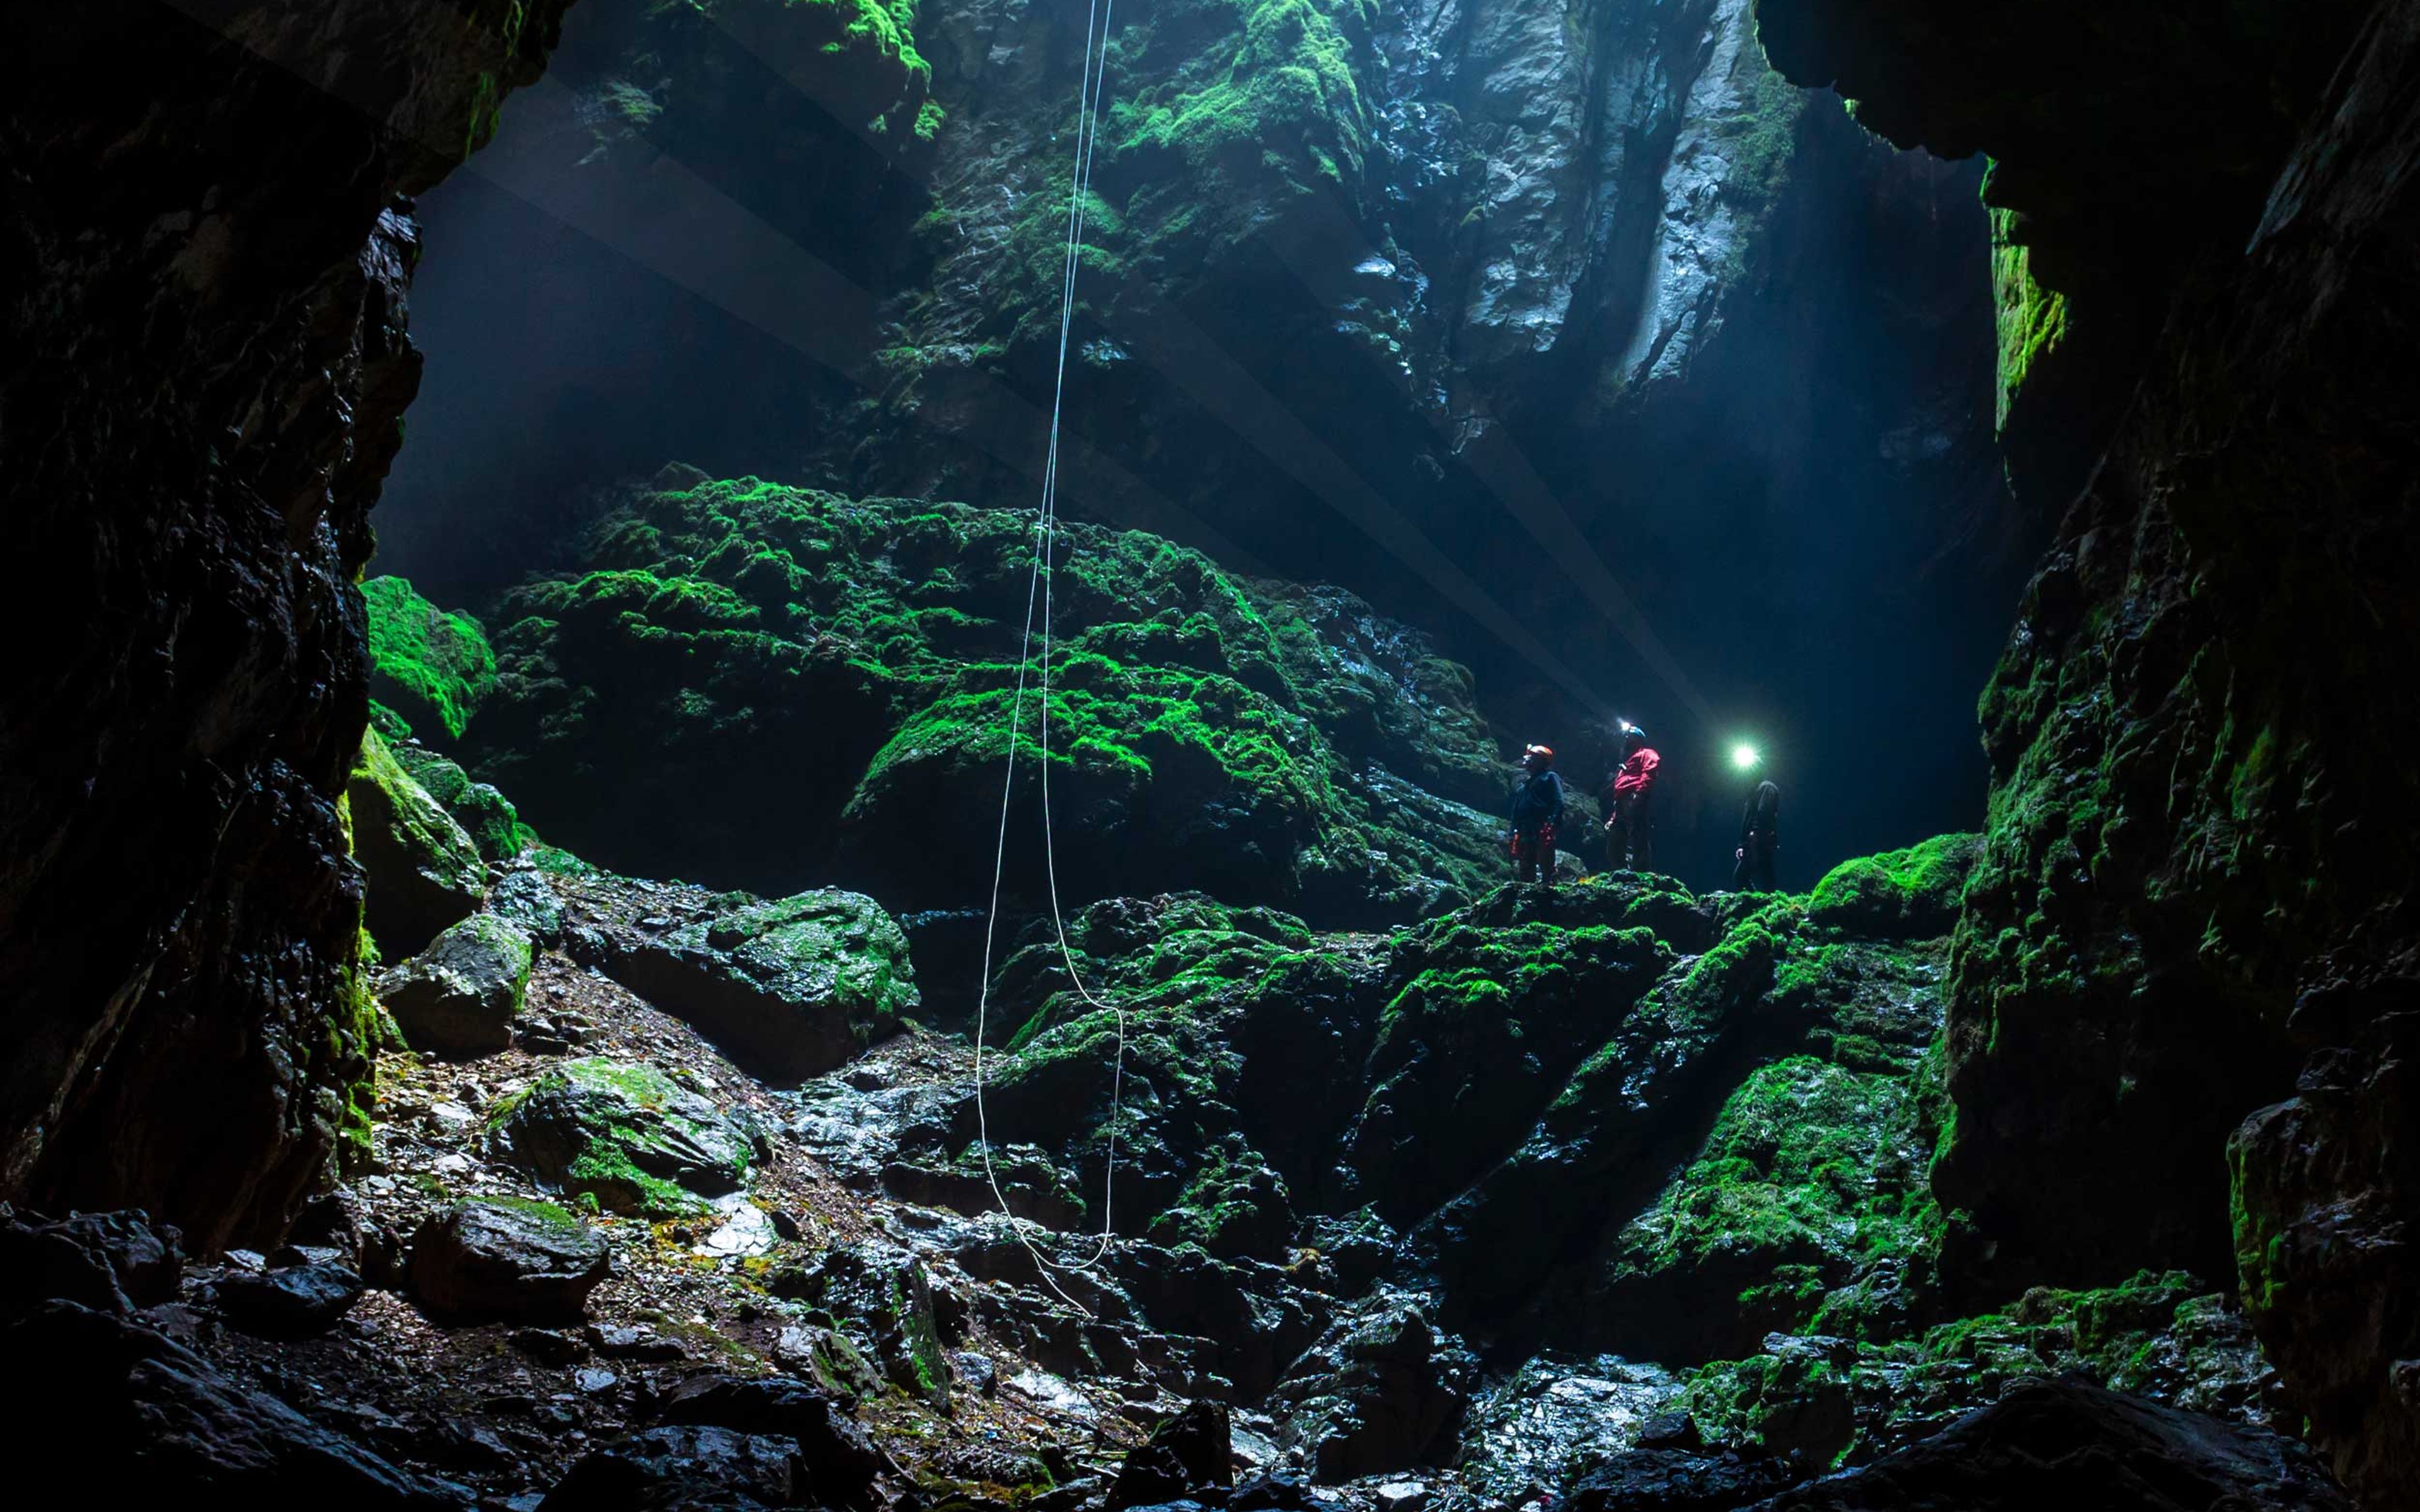 Caving team at the bottom of a deep cave wearing torches, with ropes hanging from the daylight above.